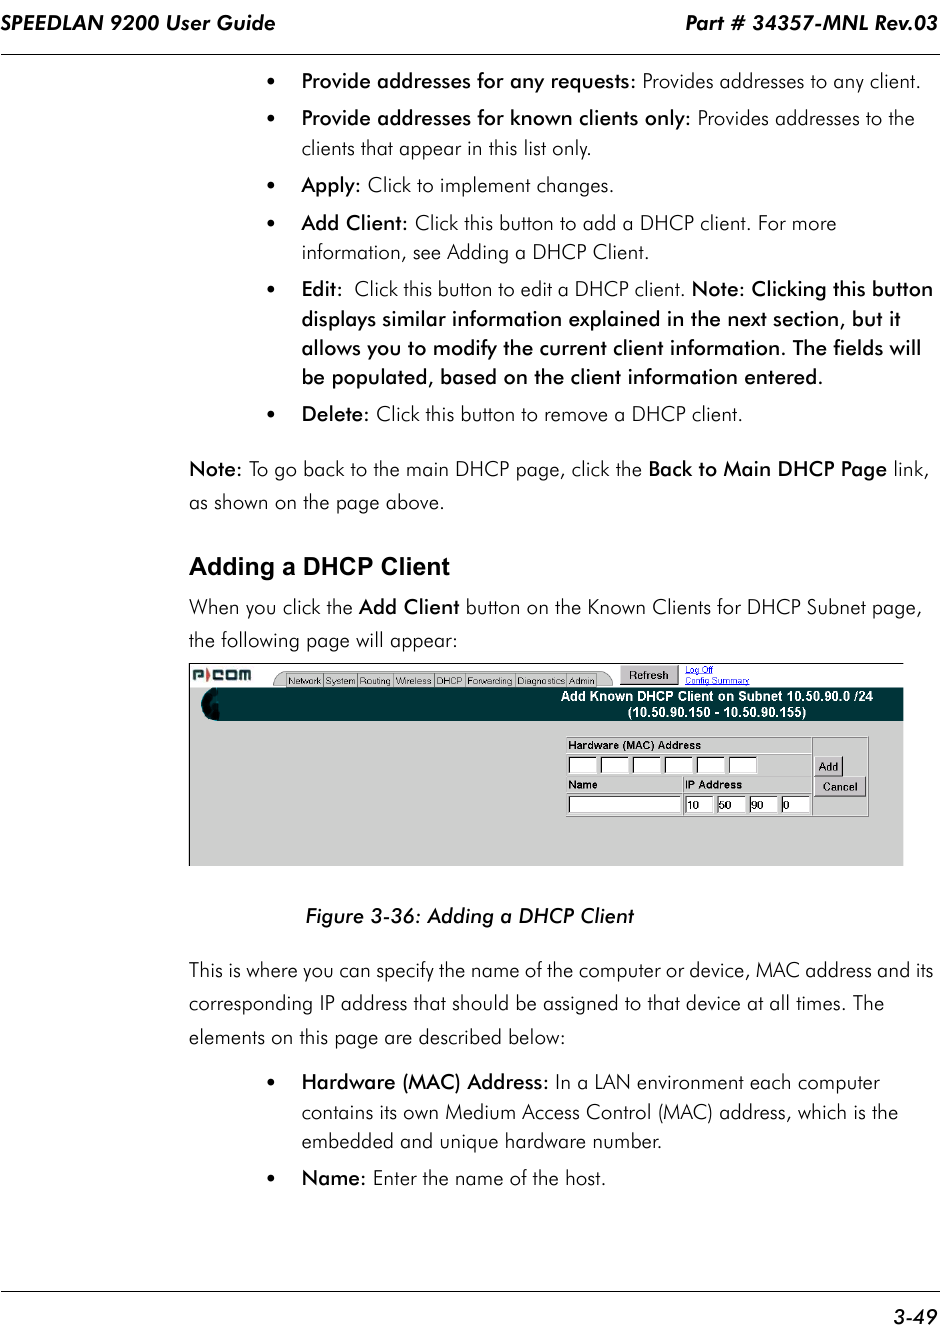 SPEEDLAN 9200 User Guide                                                                    Part # 34357-MNL Rev.03      3-49                                                                                                                                                              •Provide addresses for any requests: Provides addresses to any client.•Provide addresses for known clients only: Provides addresses to the clients that appear in this list only. •Apply: Click to implement changes.•Add Client: Click this button to add a DHCP client. For more information, see Adding a DHCP Client.•Edit:        Click this button to edit a DHCP client. Note: Clicking this button displays similar information explained in the next section, but it allows you to modify the current client information. The fields will be populated, based on the client information entered.•Delete: Click this button to remove a DHCP client.Note: To go back to the main DHCP page, click the Back to Main DHCP Page    link, as shown on the page above.Adding a DHCP ClientWhen you click the Add Client button on the Known Clients for DHCP Subnet page,  the following page will appear:Figure 3-36: Adding a DHCP ClientThis is where you can specify the name of the computer or device, MAC address and its corresponding IP address that should be assigned to that device at all times. The elements on this page are described below:•Hardware (MAC) Address: In a LAN environment each computer contains its own Medium Access Control (MAC) address, which is the embedded and unique hardware number.  •Name: Enter the name of the host.